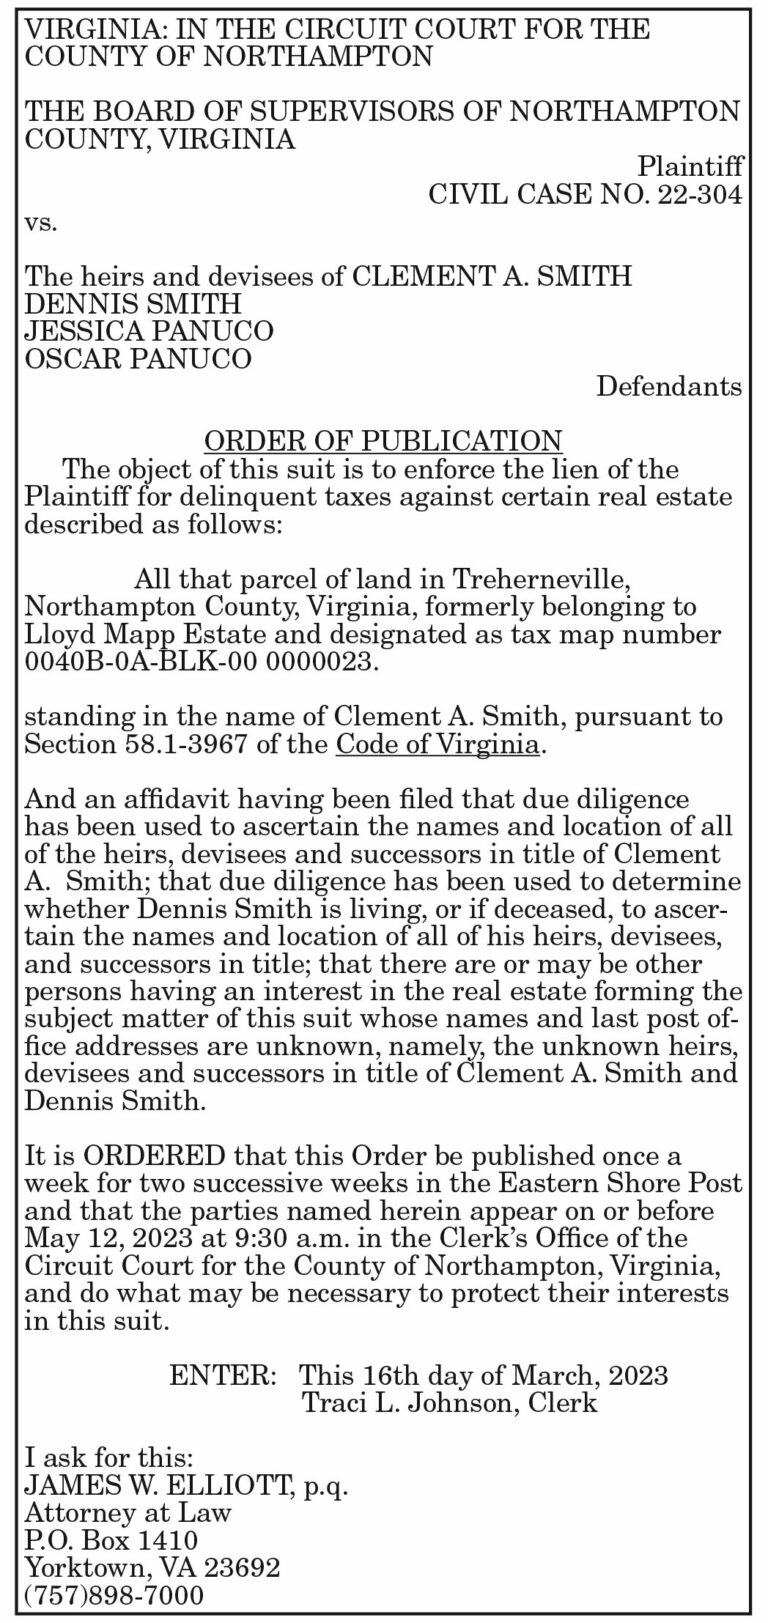 Northampton BOS vs Heirs of Clement Smith, 3.24, 3.31